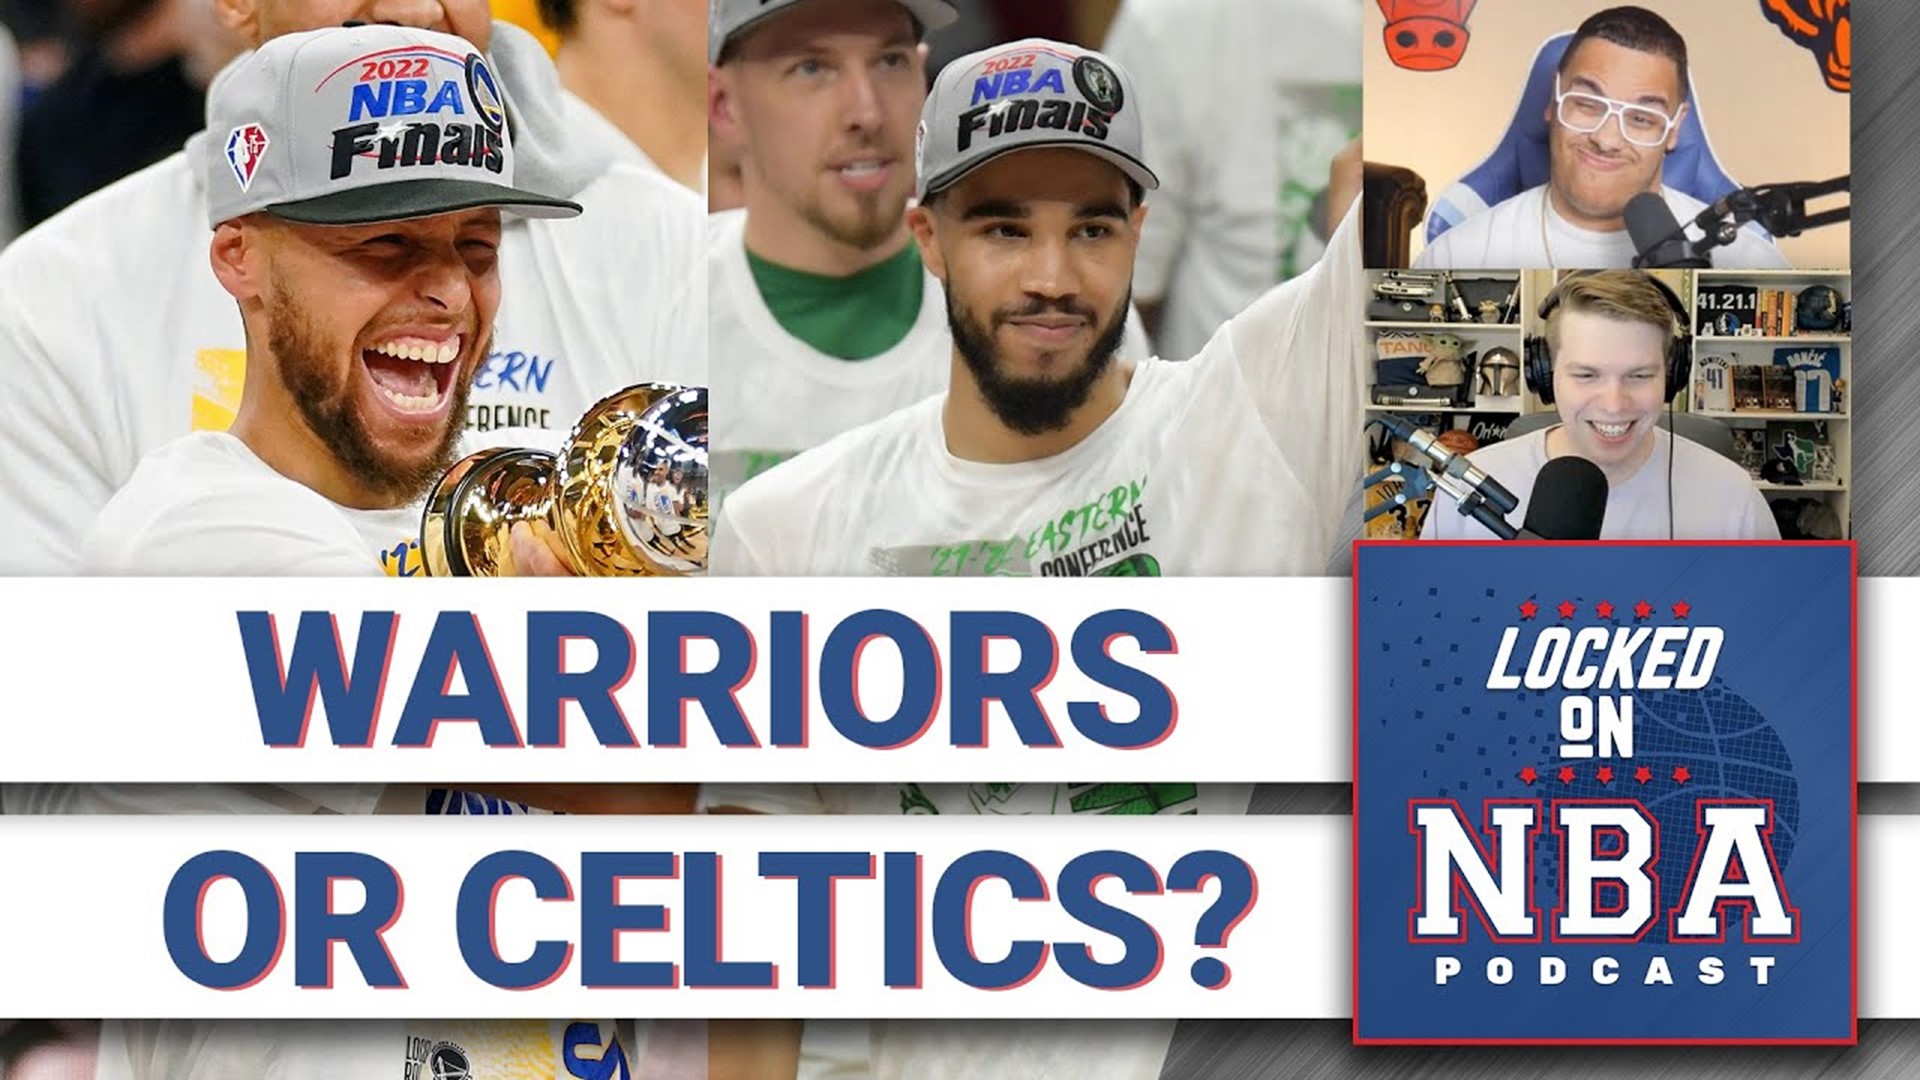 Steph Curry Over Jayson Tatum & Reasons Golden State Warriors or Boston Celtics Would Win NBA Finals